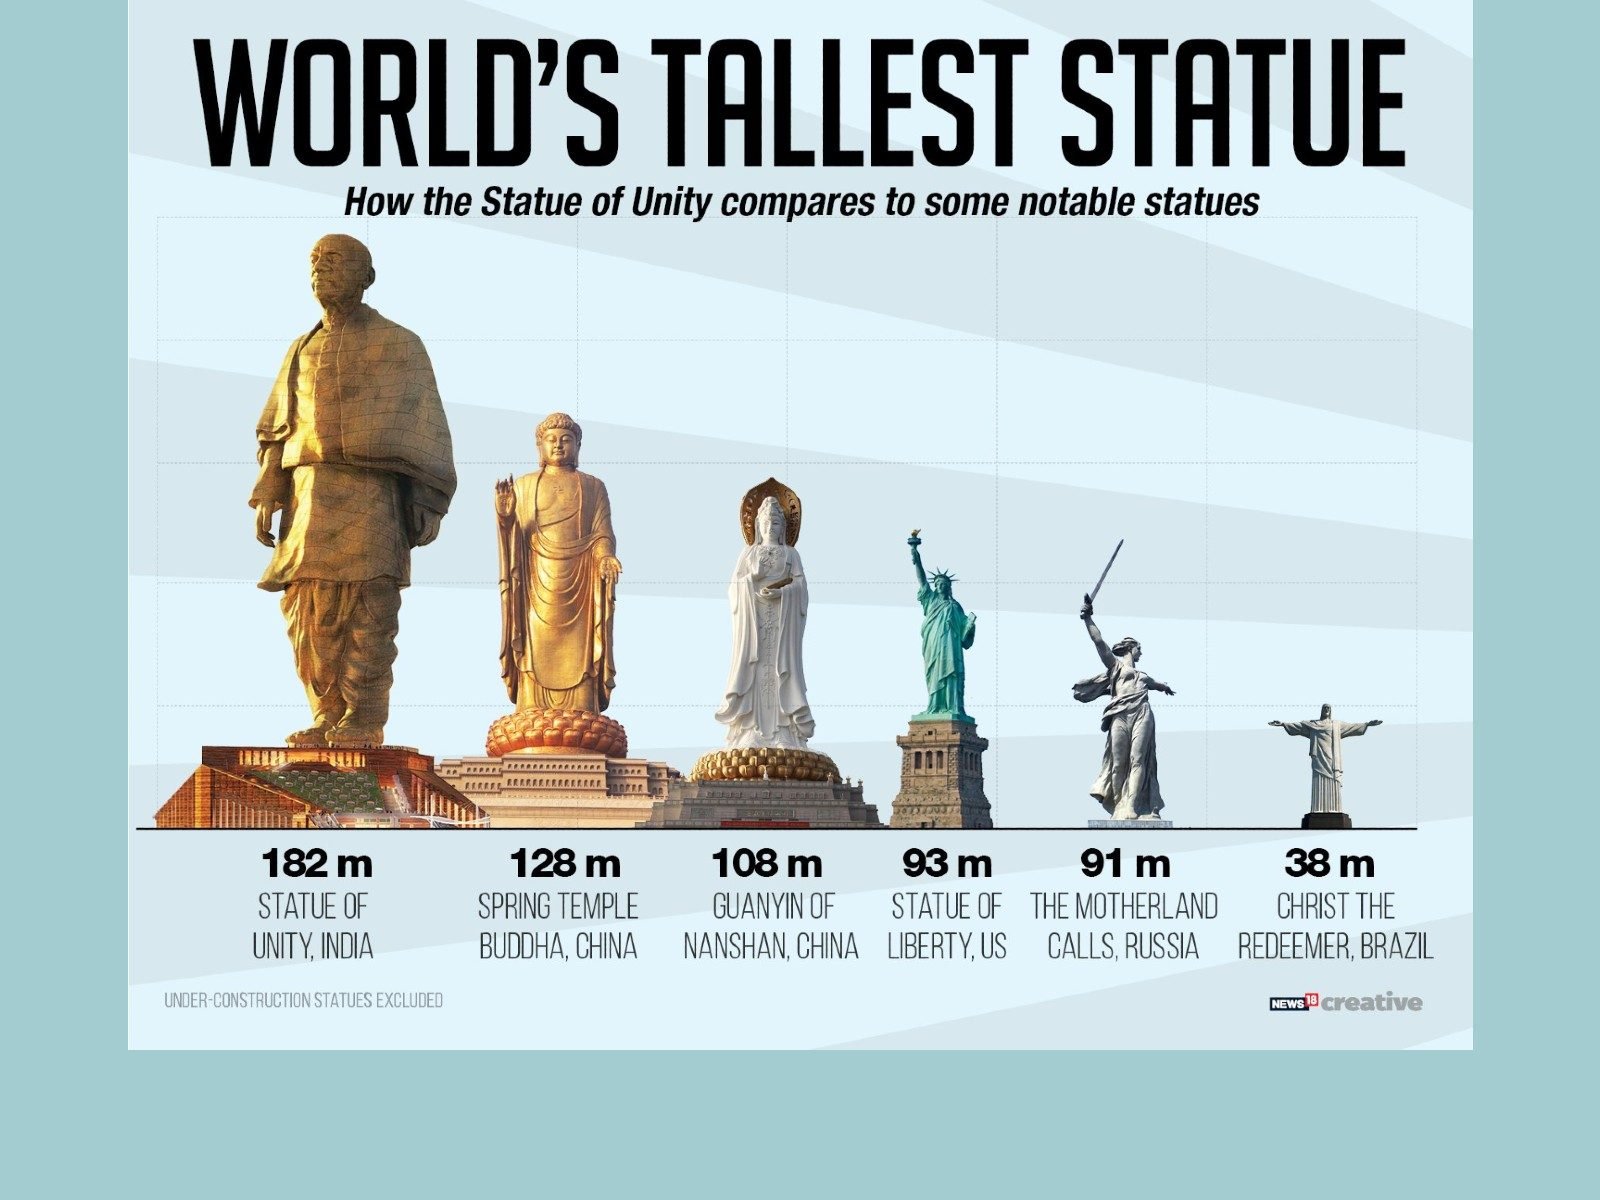 Statue of Unity: India's Monument to Unity and Sardar Patel's Legacy